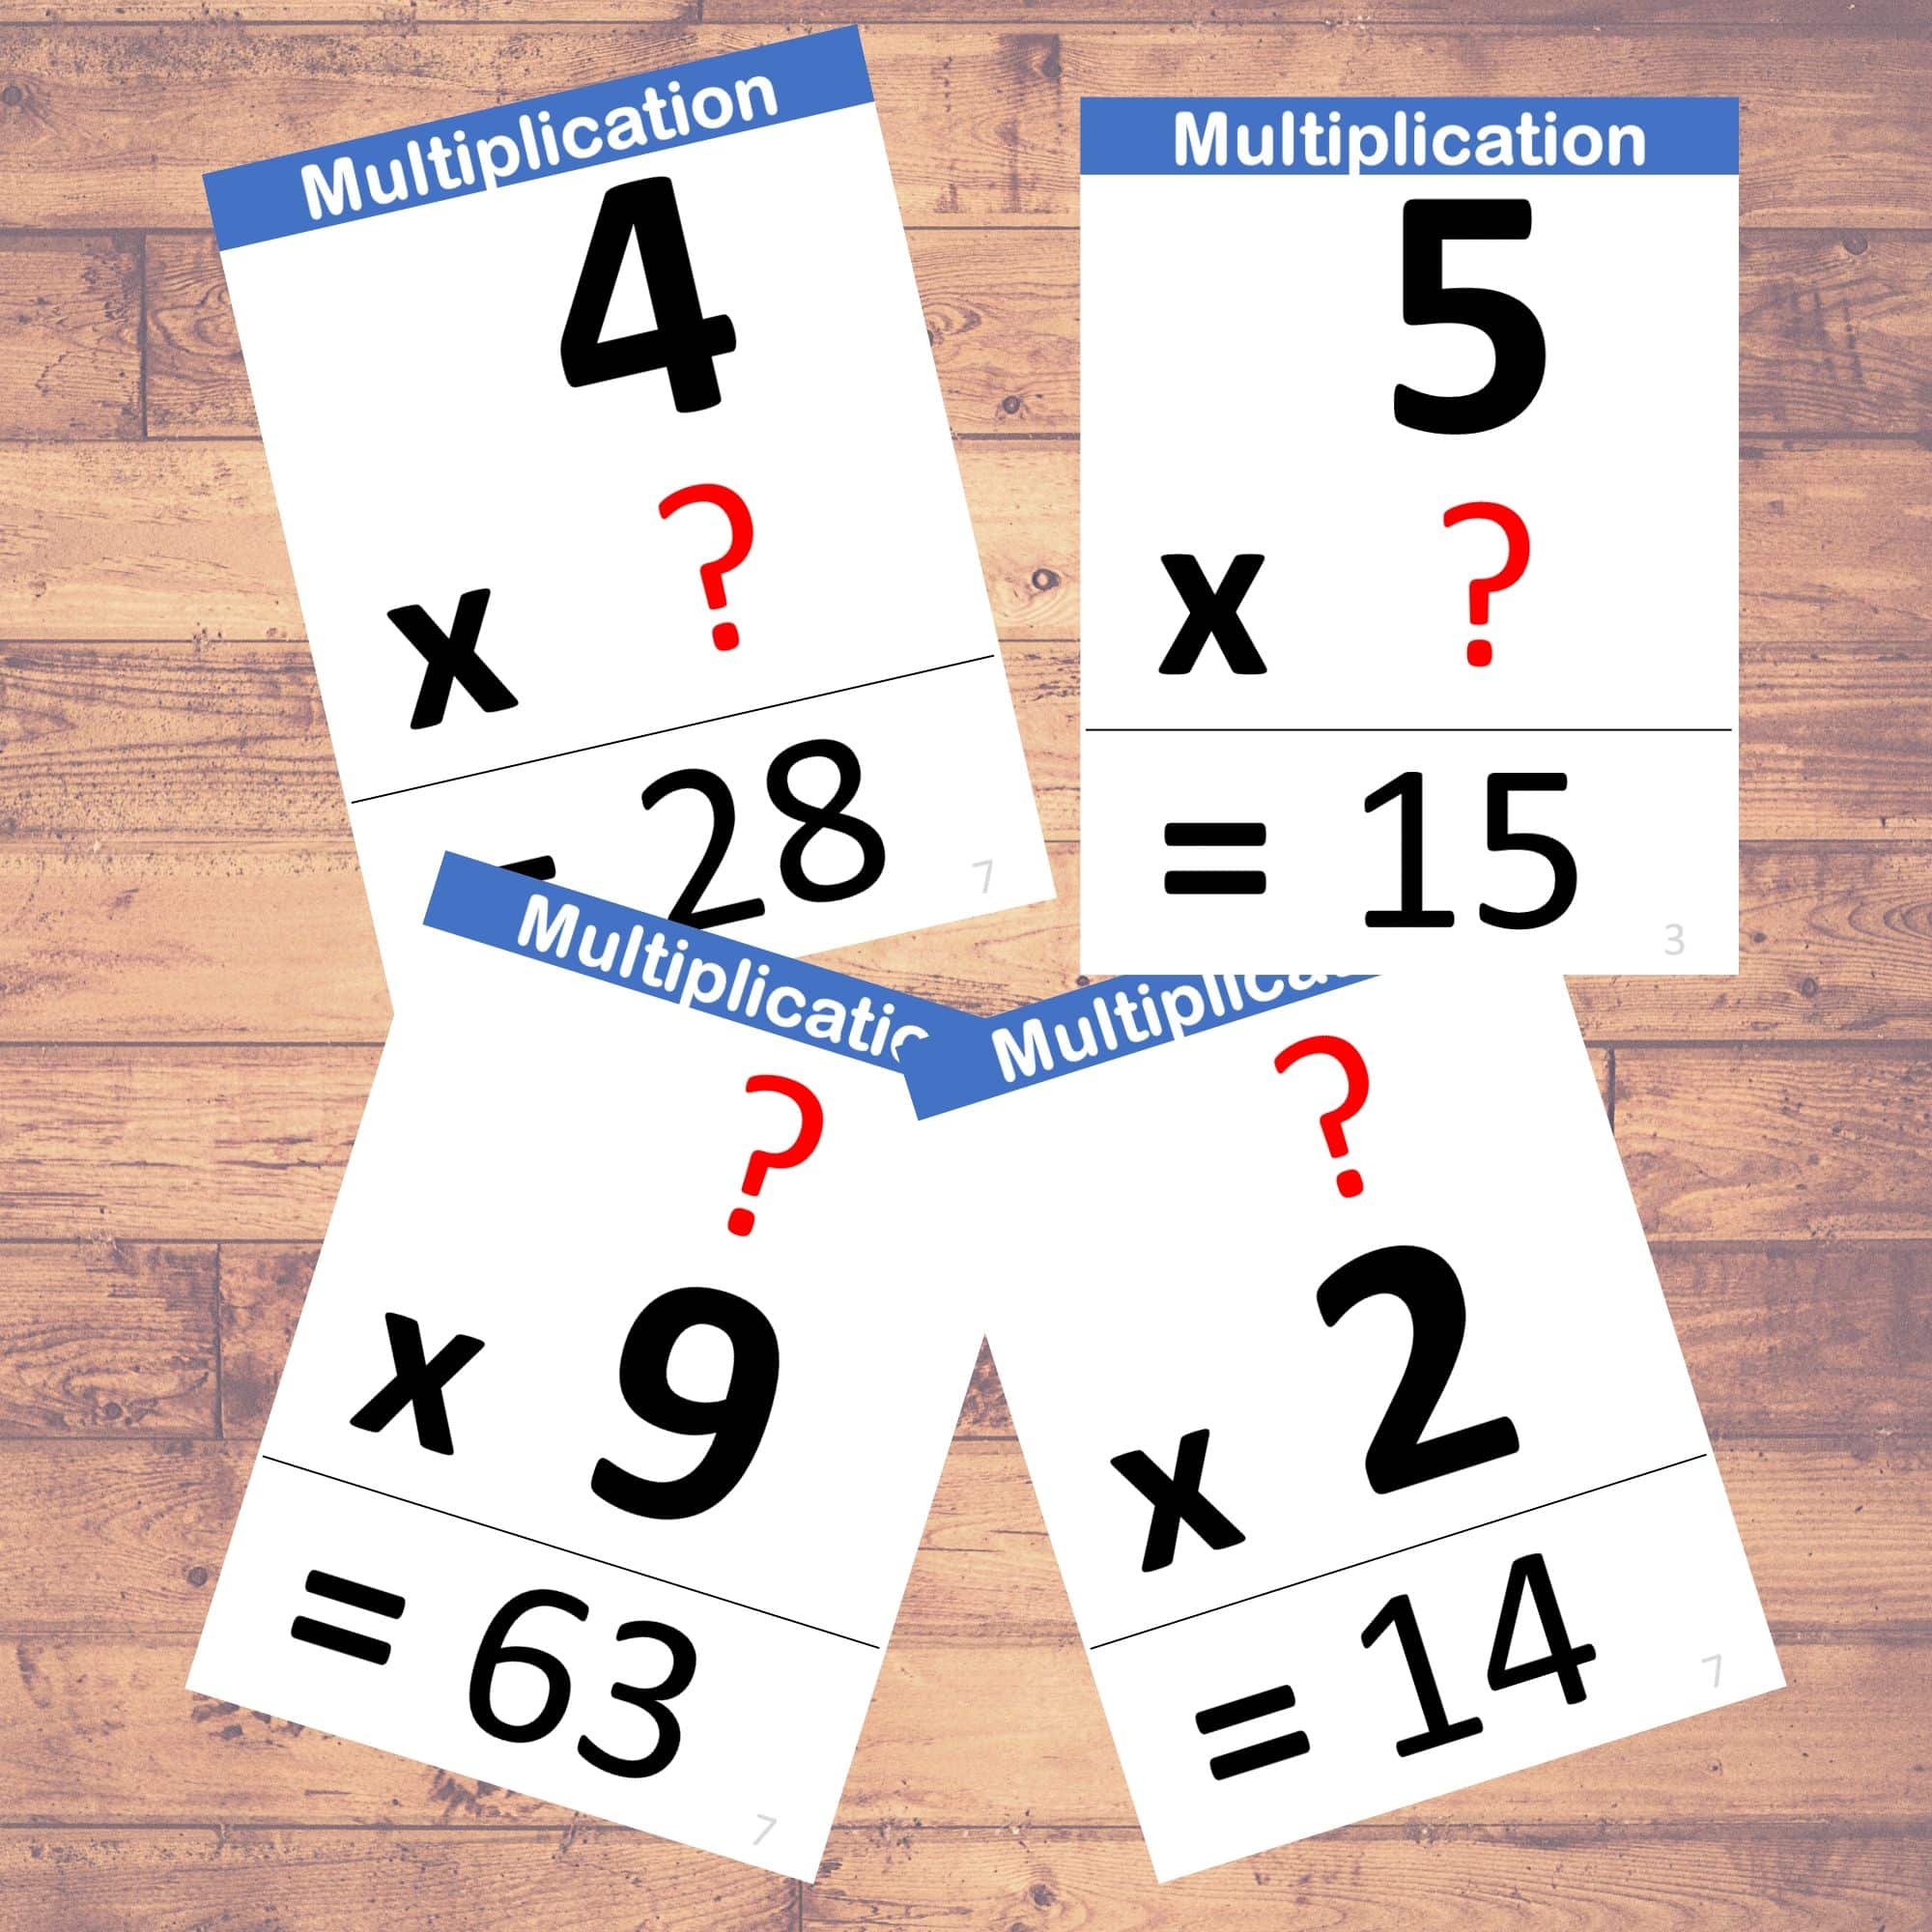 multiplication-problems-flashcards-math-learning-40-cards